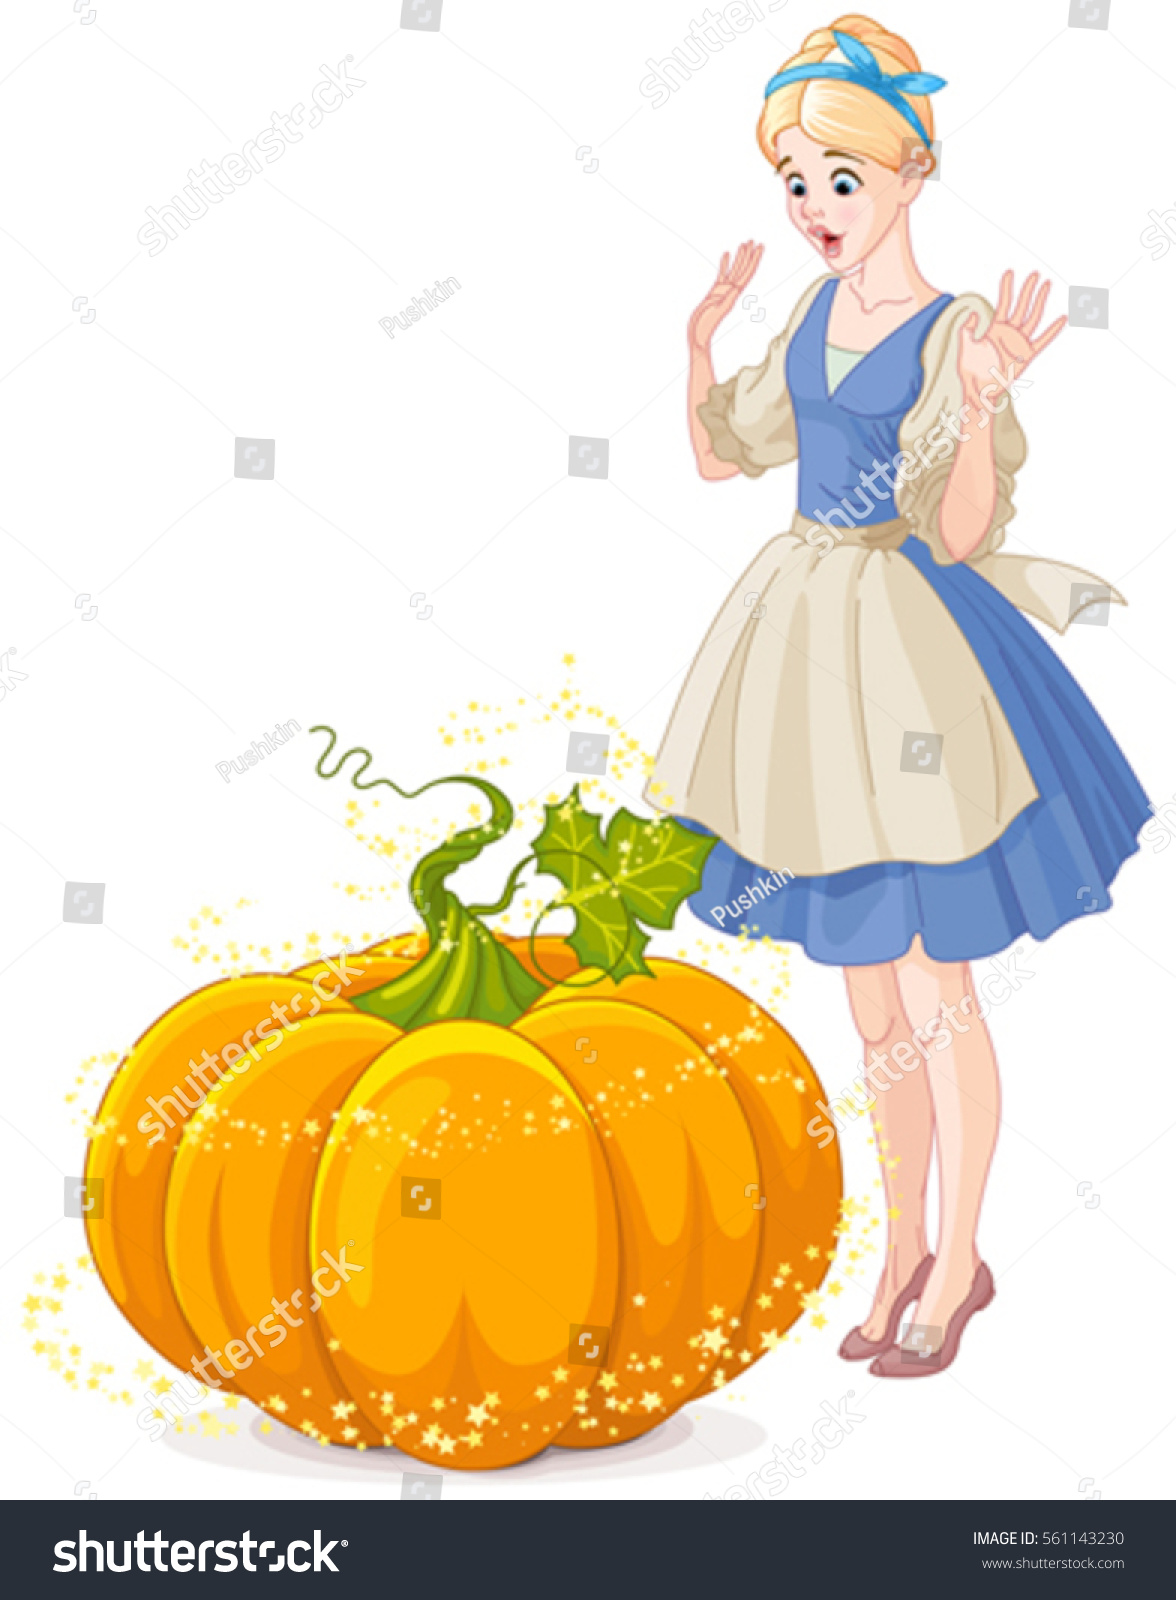 SVG of Cinderella Surprised by Pumpkin turning into a carriage svg